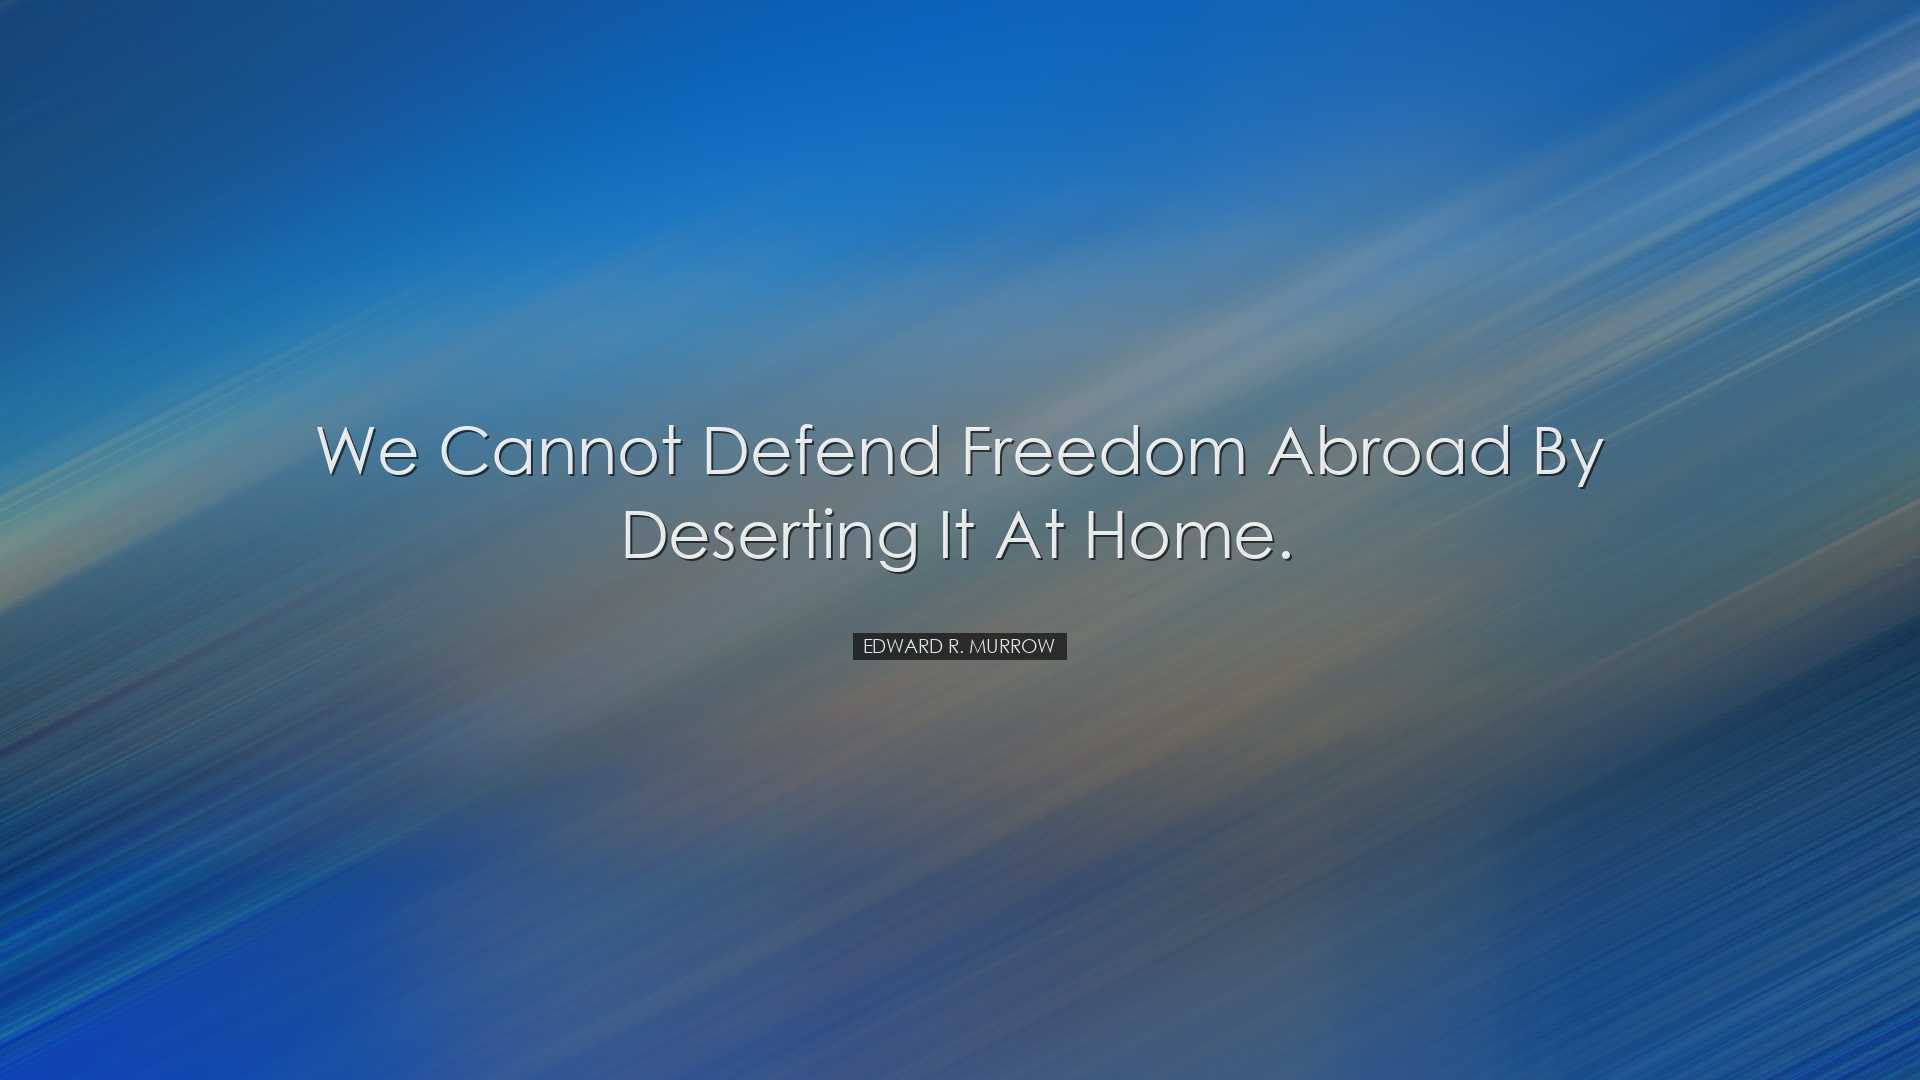 We cannot defend freedom abroad by deserting it at home. - Edward